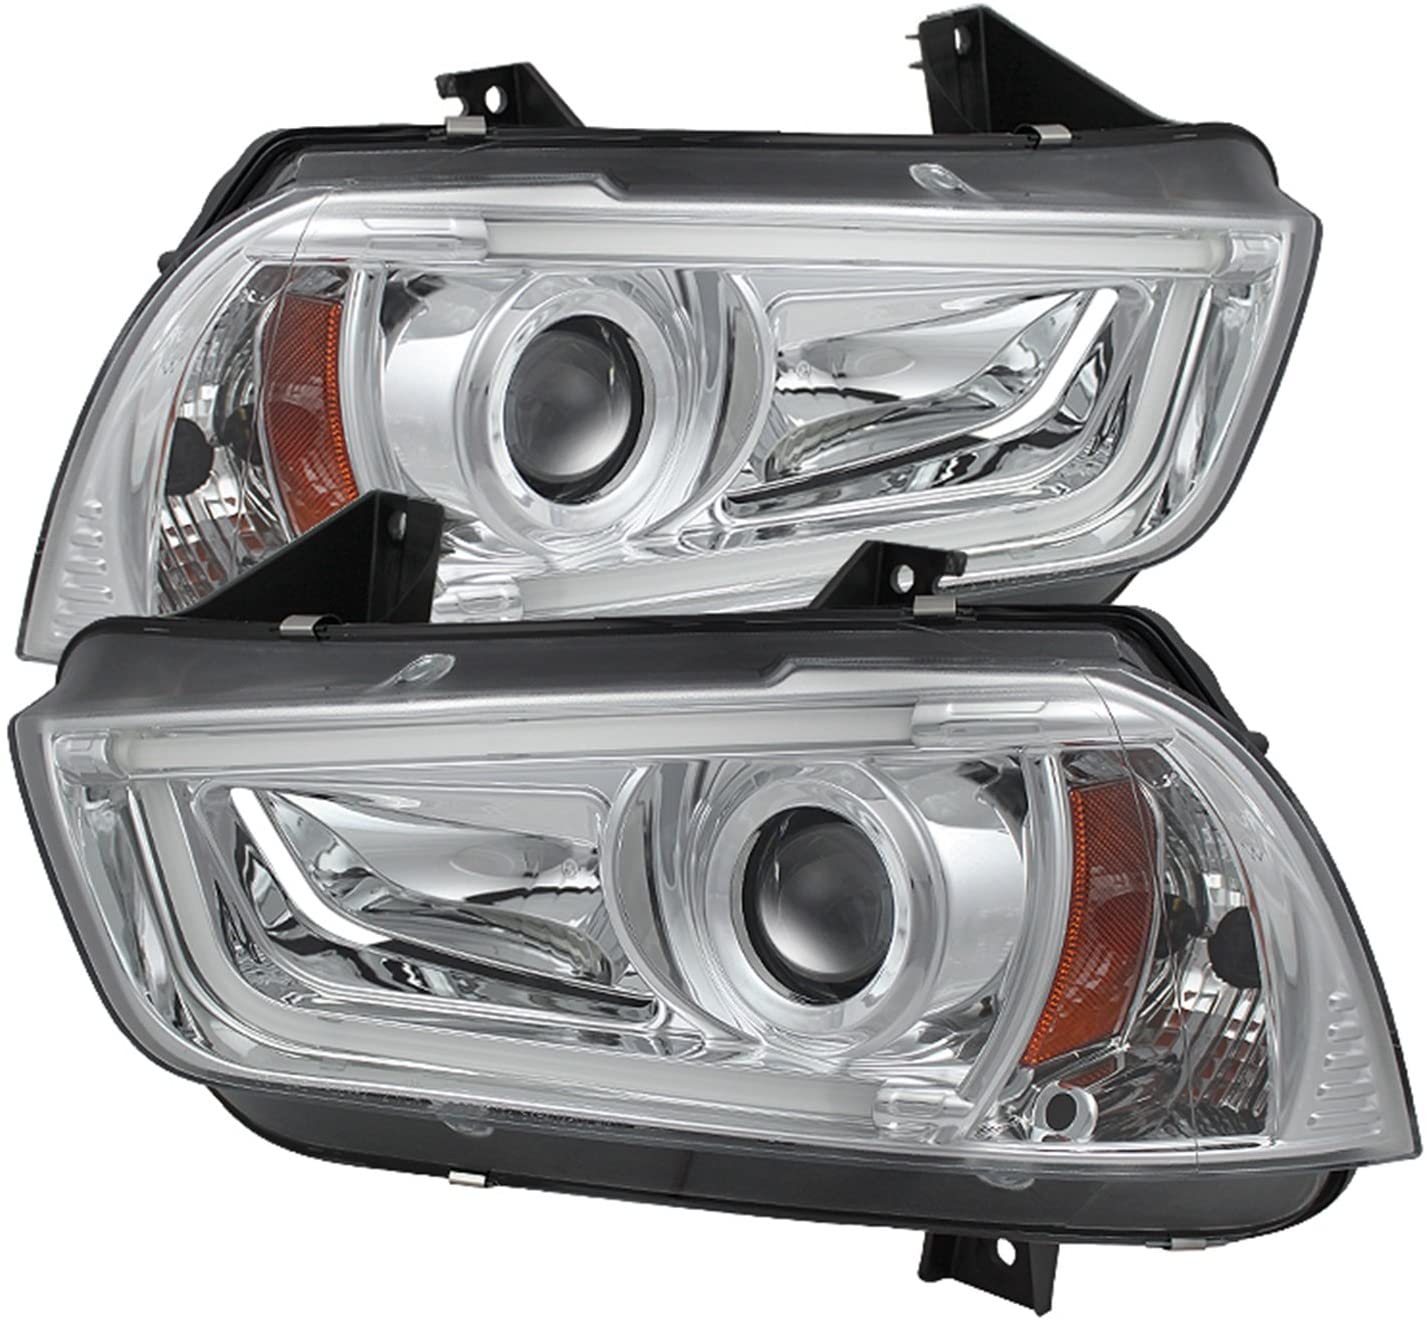 Spyder 5074201 Dodge Charger 11-14 Projector Headlights - Xenon/HID Model Only (Not Compatible With Halogen Model) - Light Tube DRL - Black - High H1 (Included) - Low D3S (Not Included)